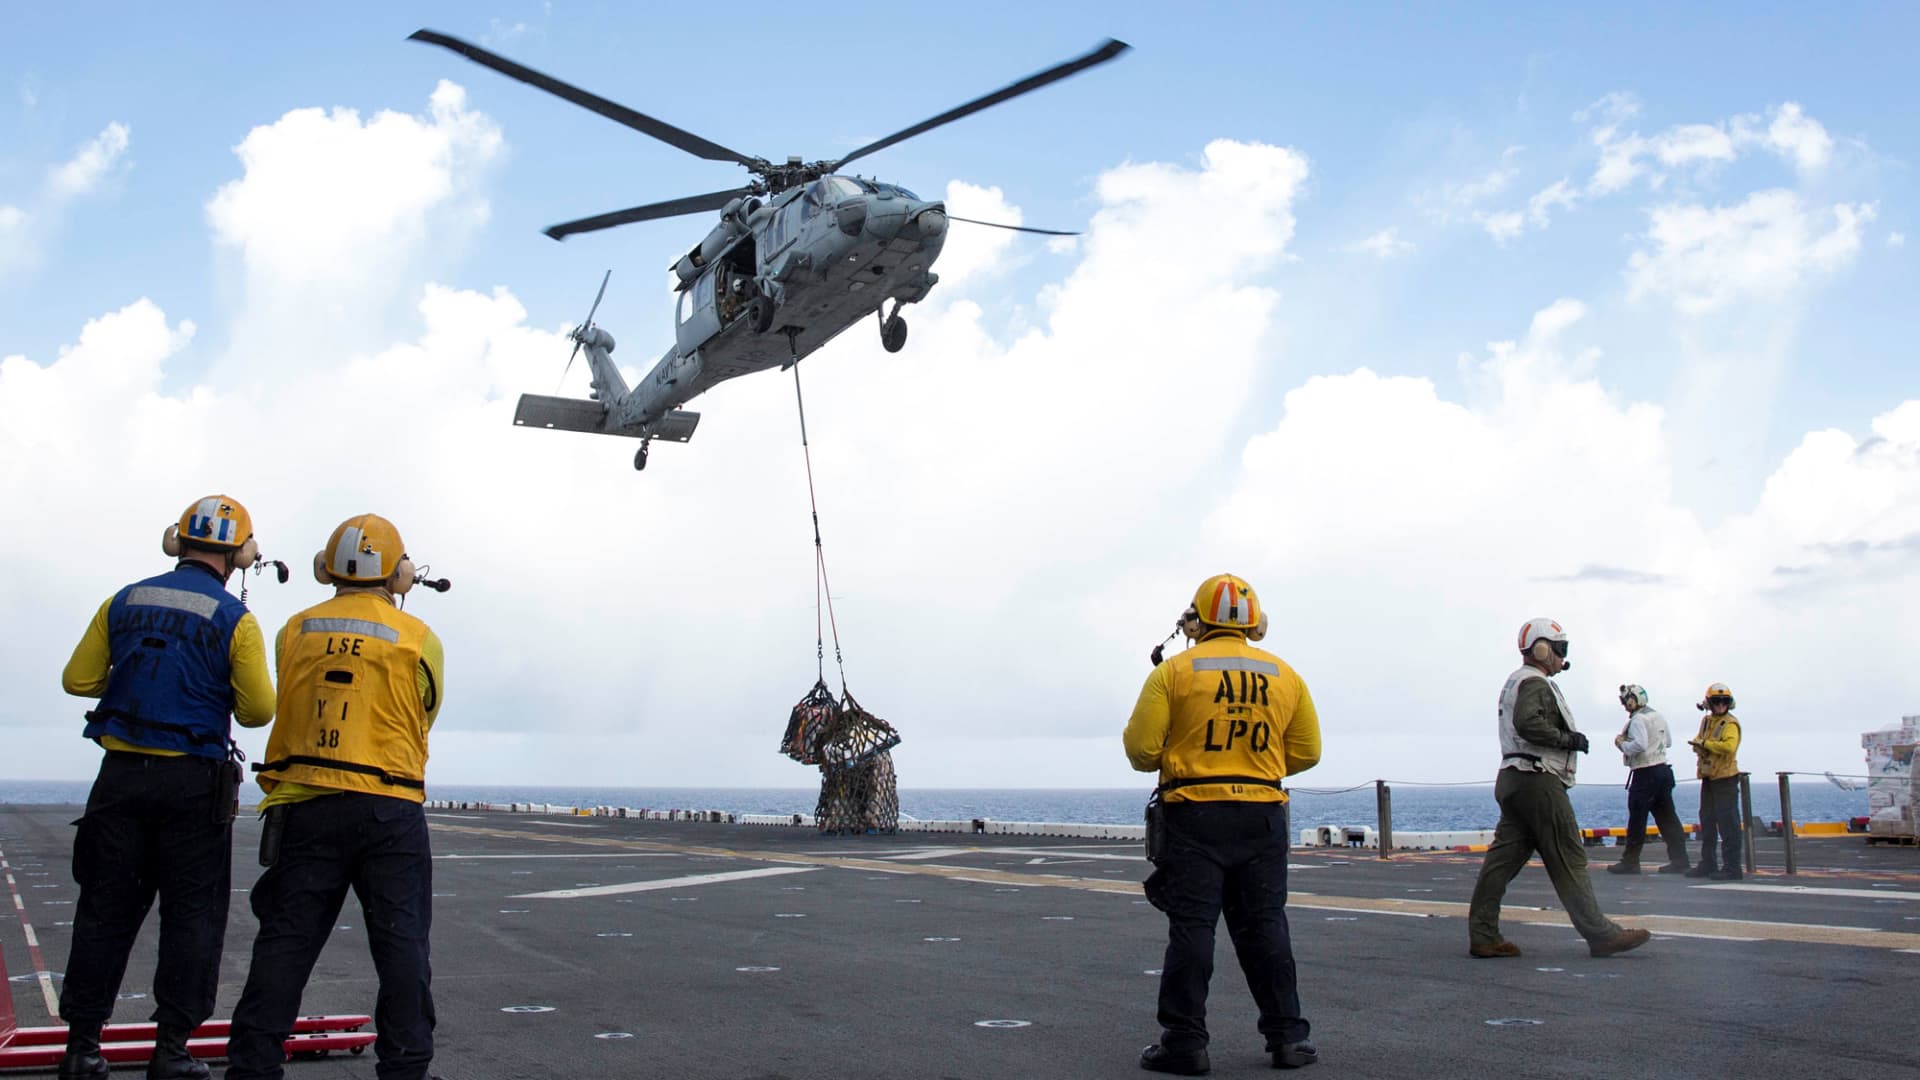 Sailors aboard the amphibious assault ship USS Kearsarge (LHD 3) observe as an MH-60 Sea Hawk helicopter drops pallets of supplies onto the flight deck during a replenishment-at-sea with the fast combat support ship USNS Supply (T-AOE 6) for relief efforts in the aftermath of Hurricane Maria in Puerto Rico on September 28, 2017.